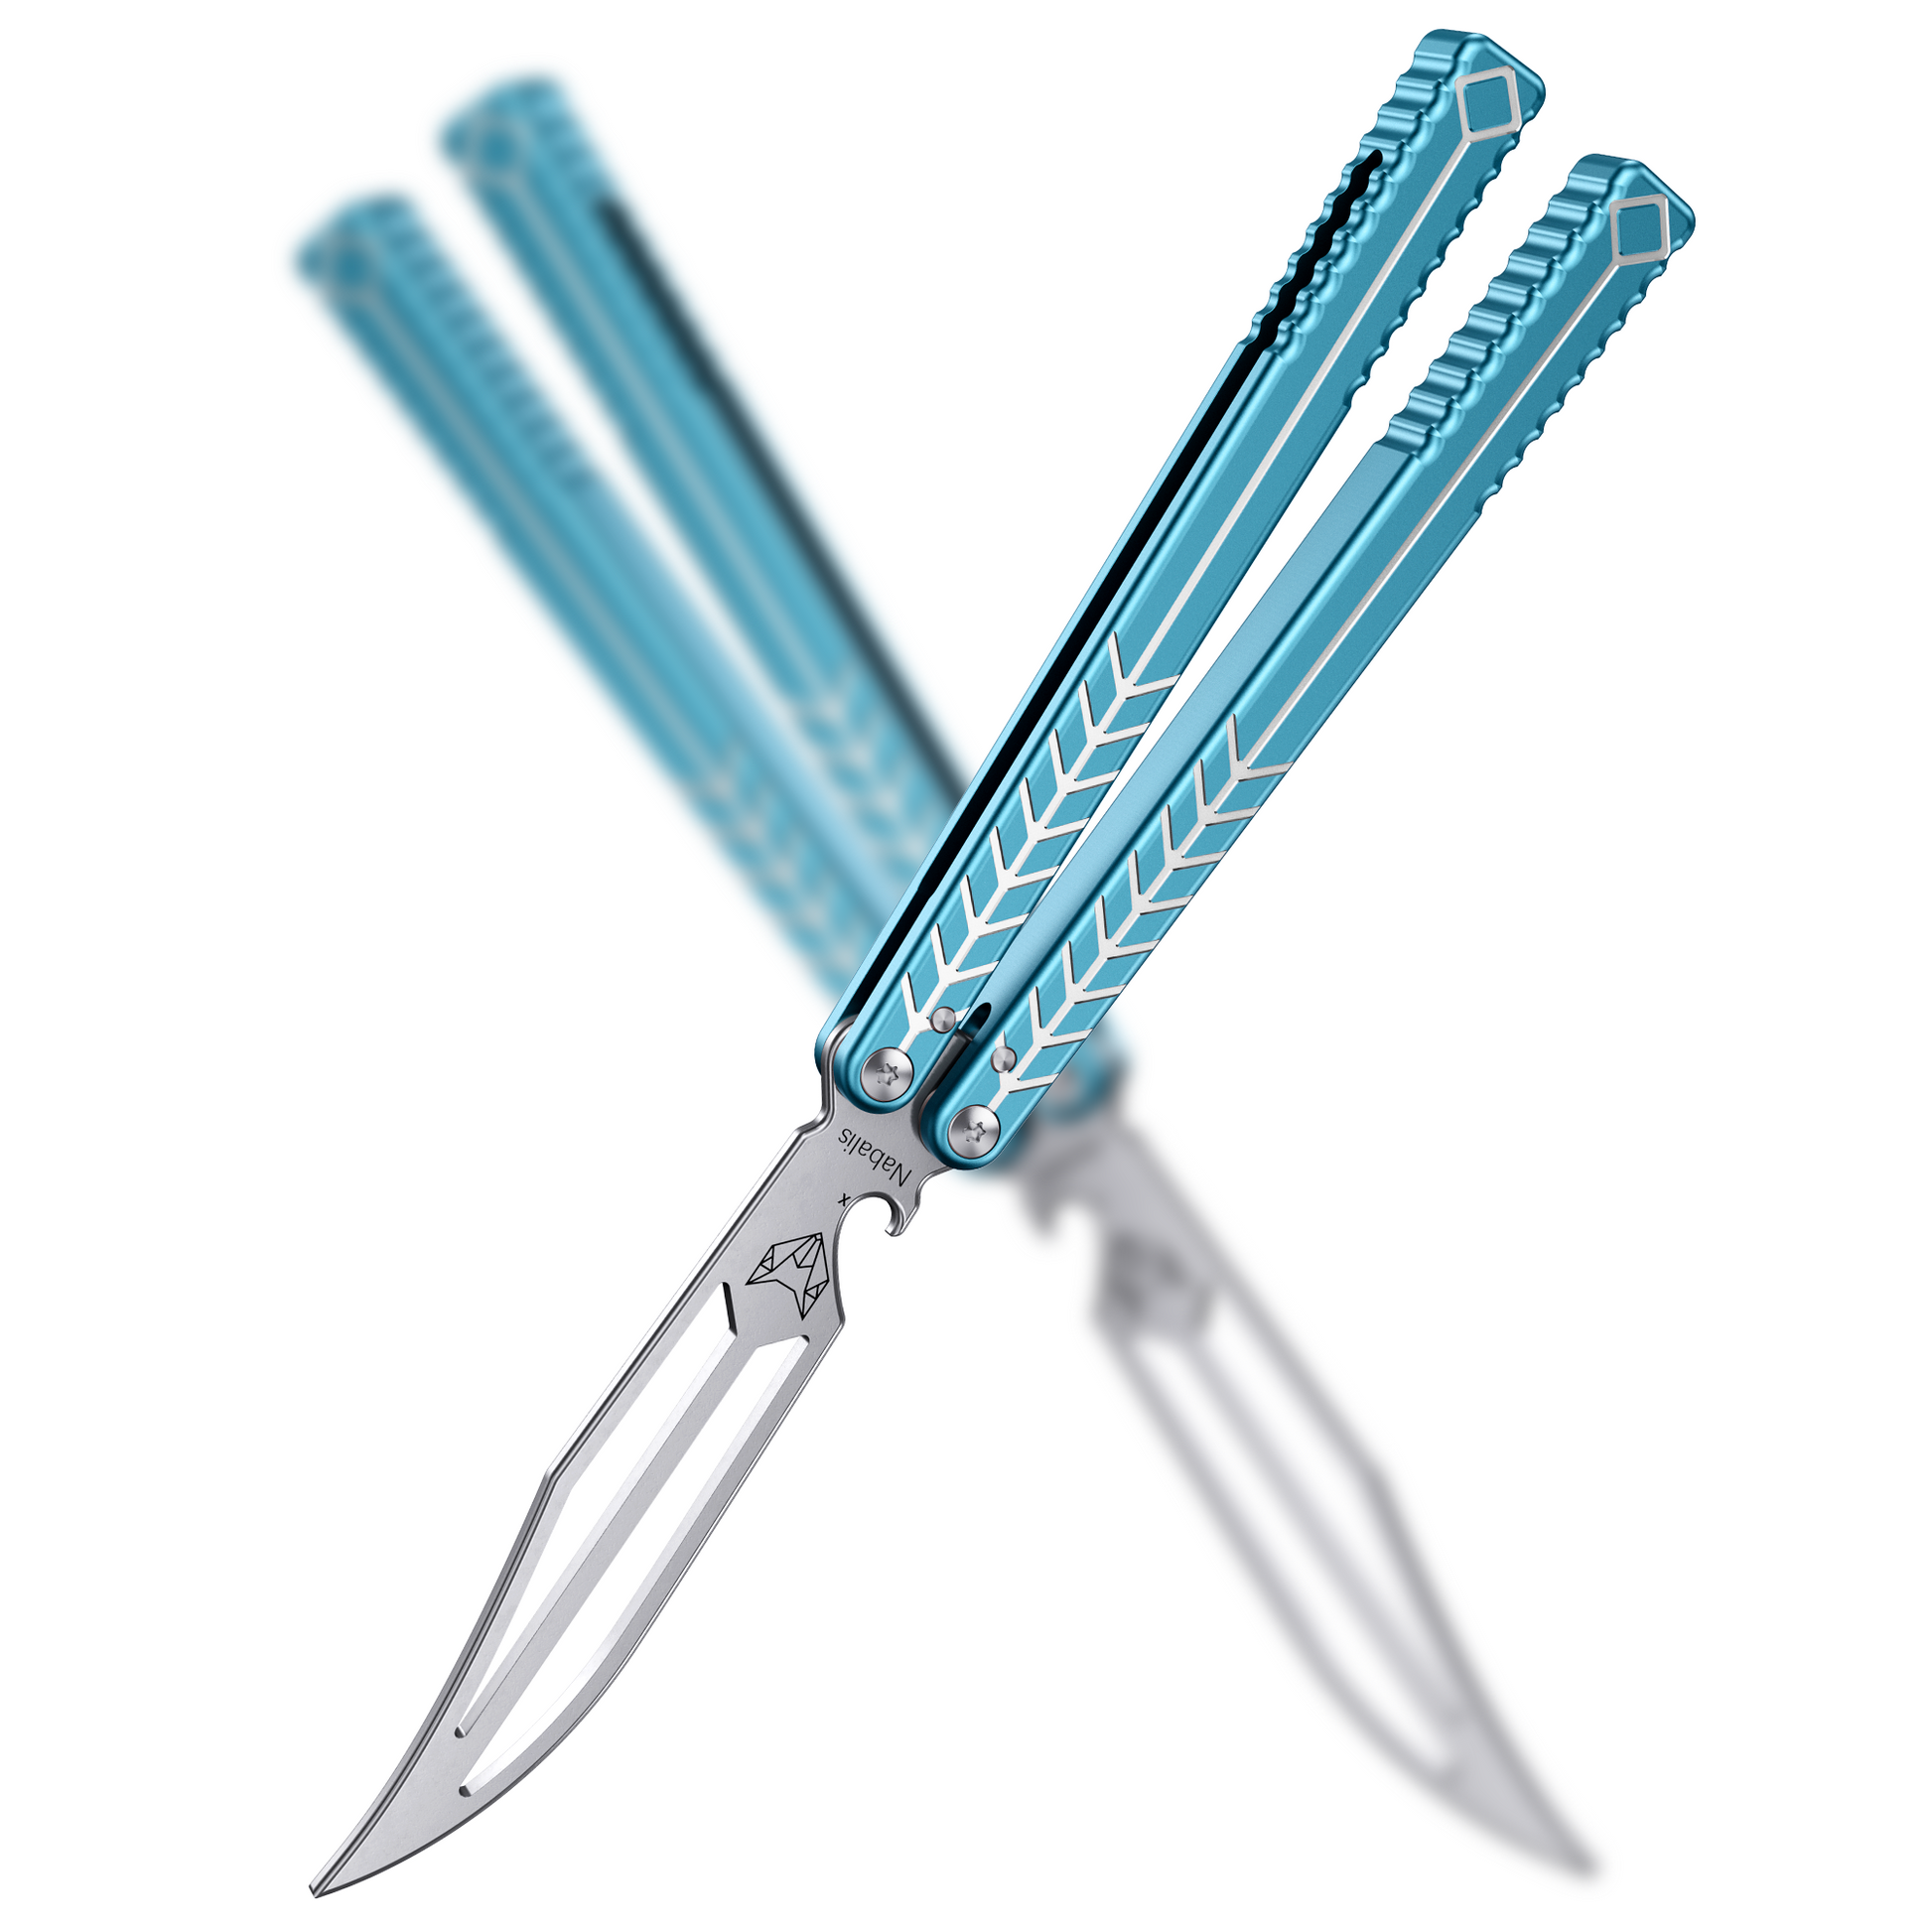 Nabalis Vulp Blemished Butterfly Knife Balisong Trainer 30% off.